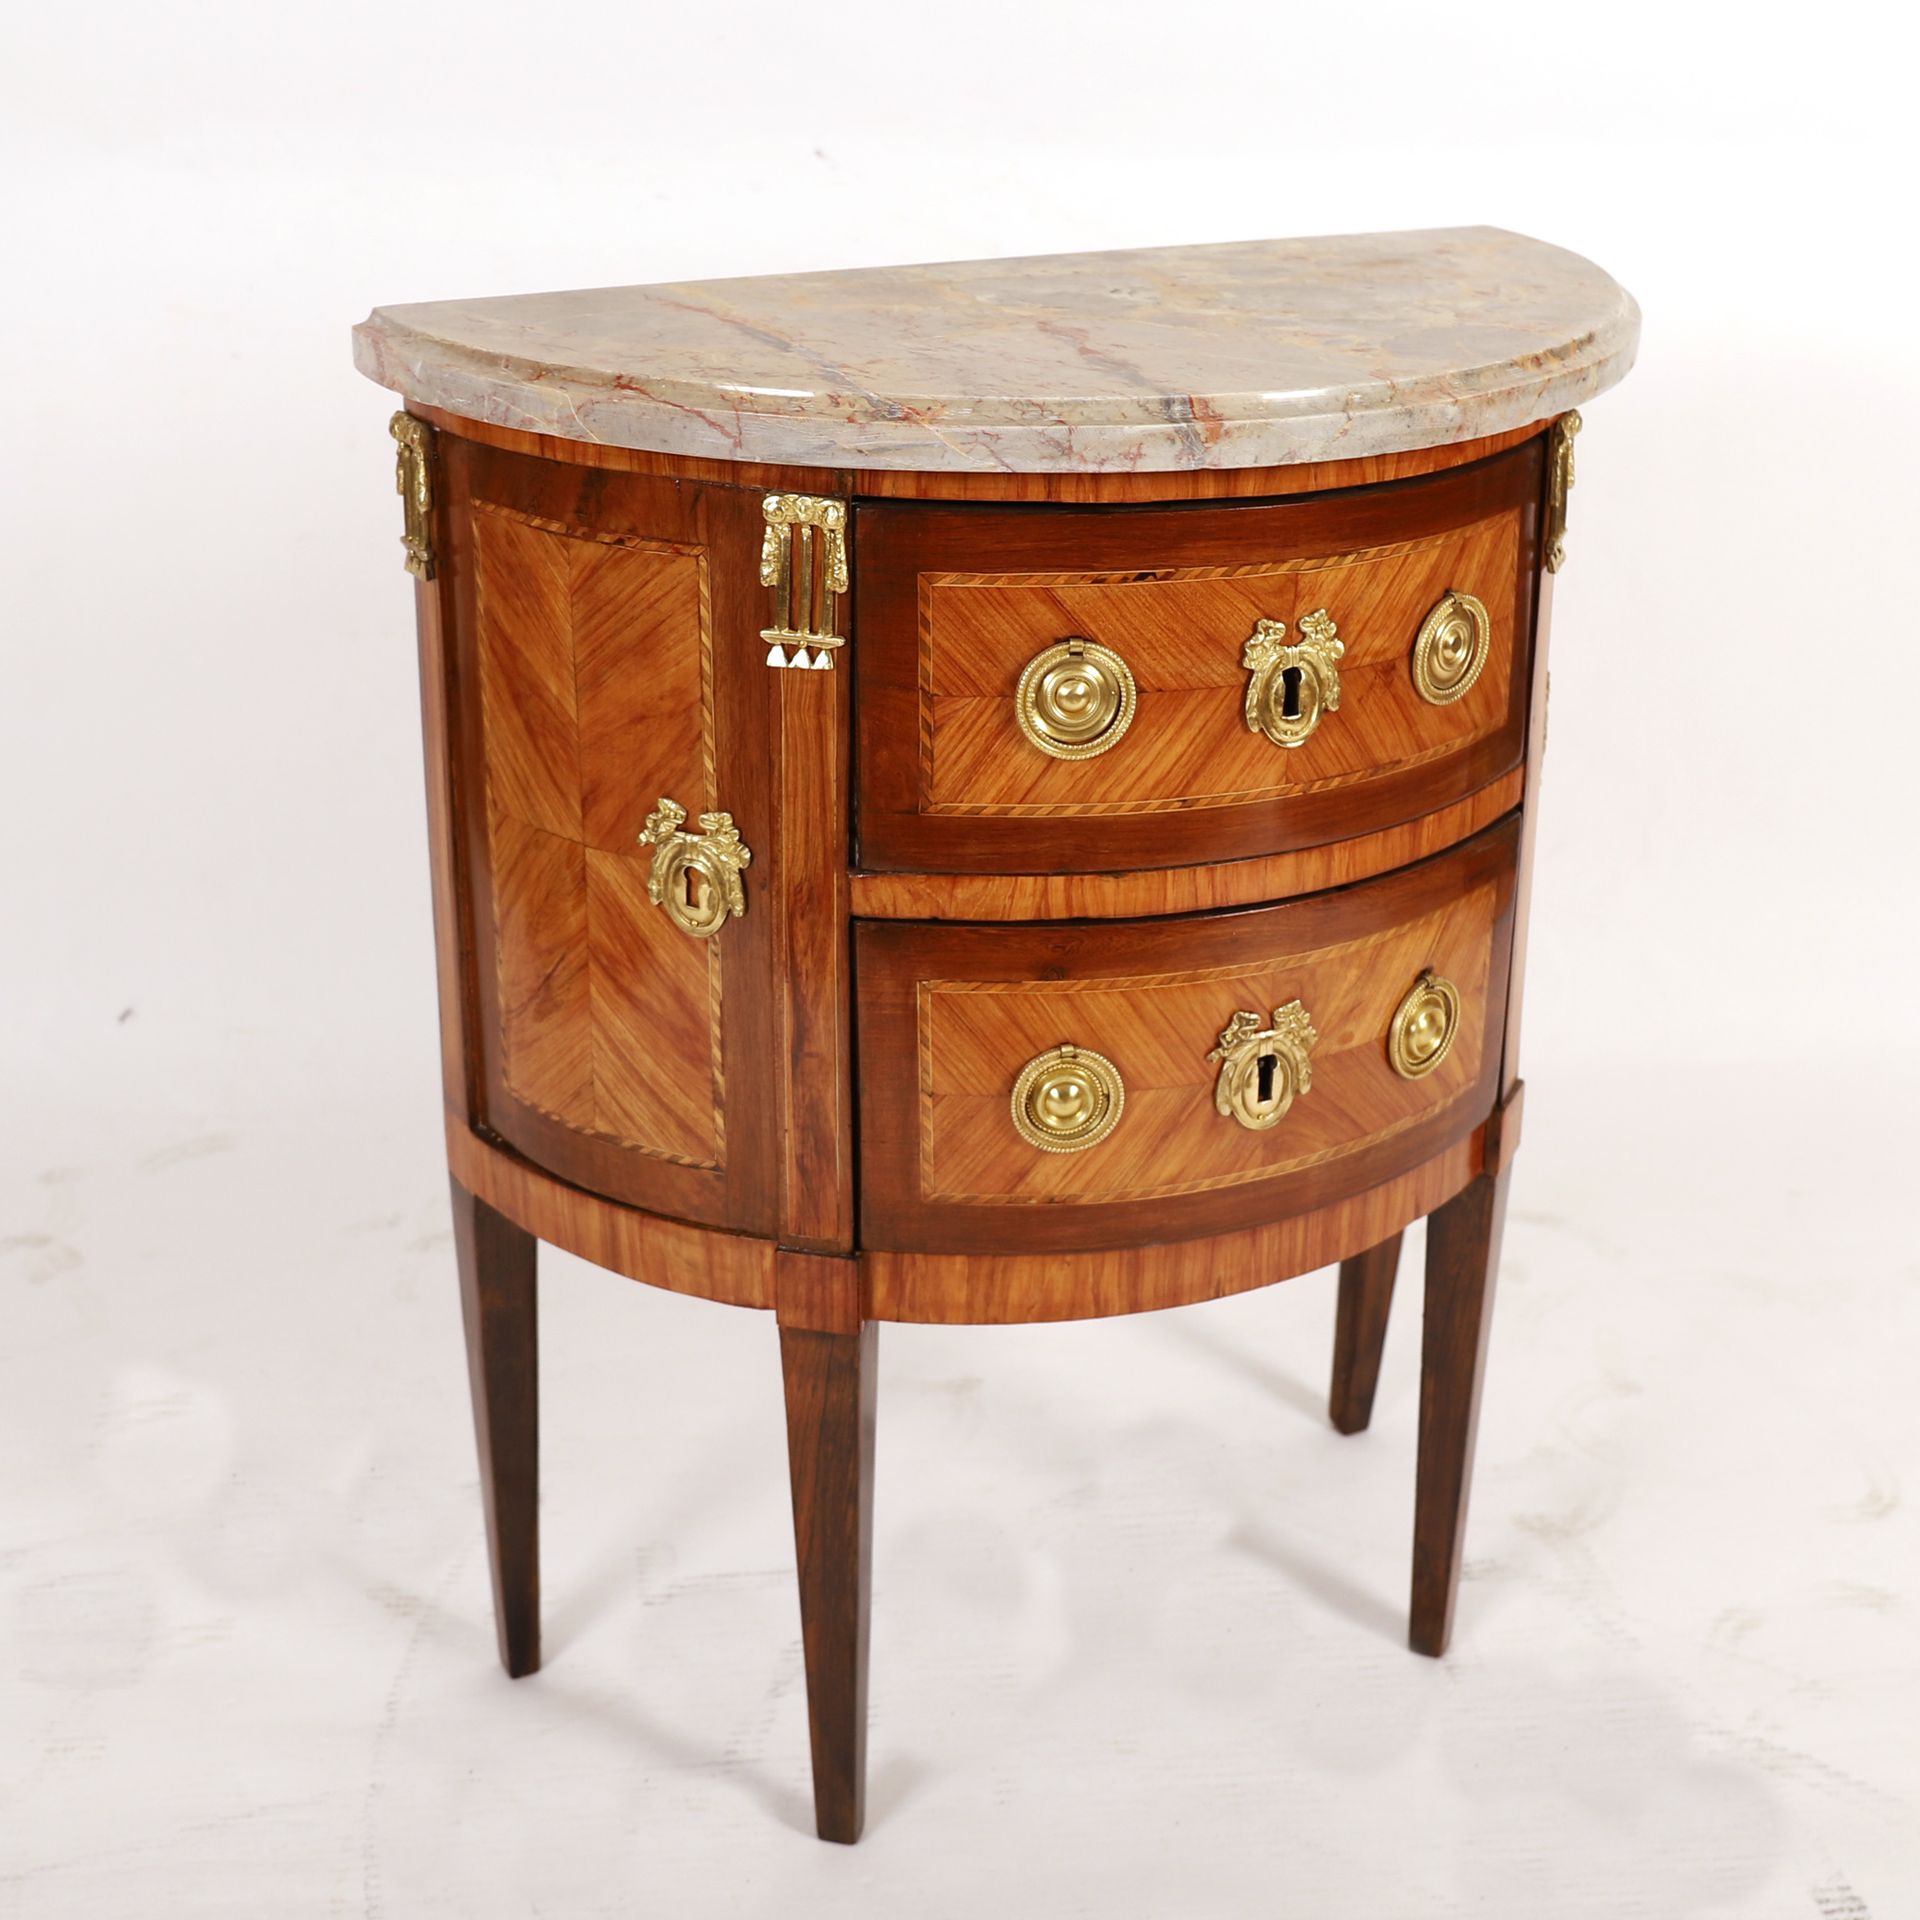 Null NICE LITTLE HALF-LUNE COMMODE LOUIS XVI, 18th century

With two rows of dra&hellip;